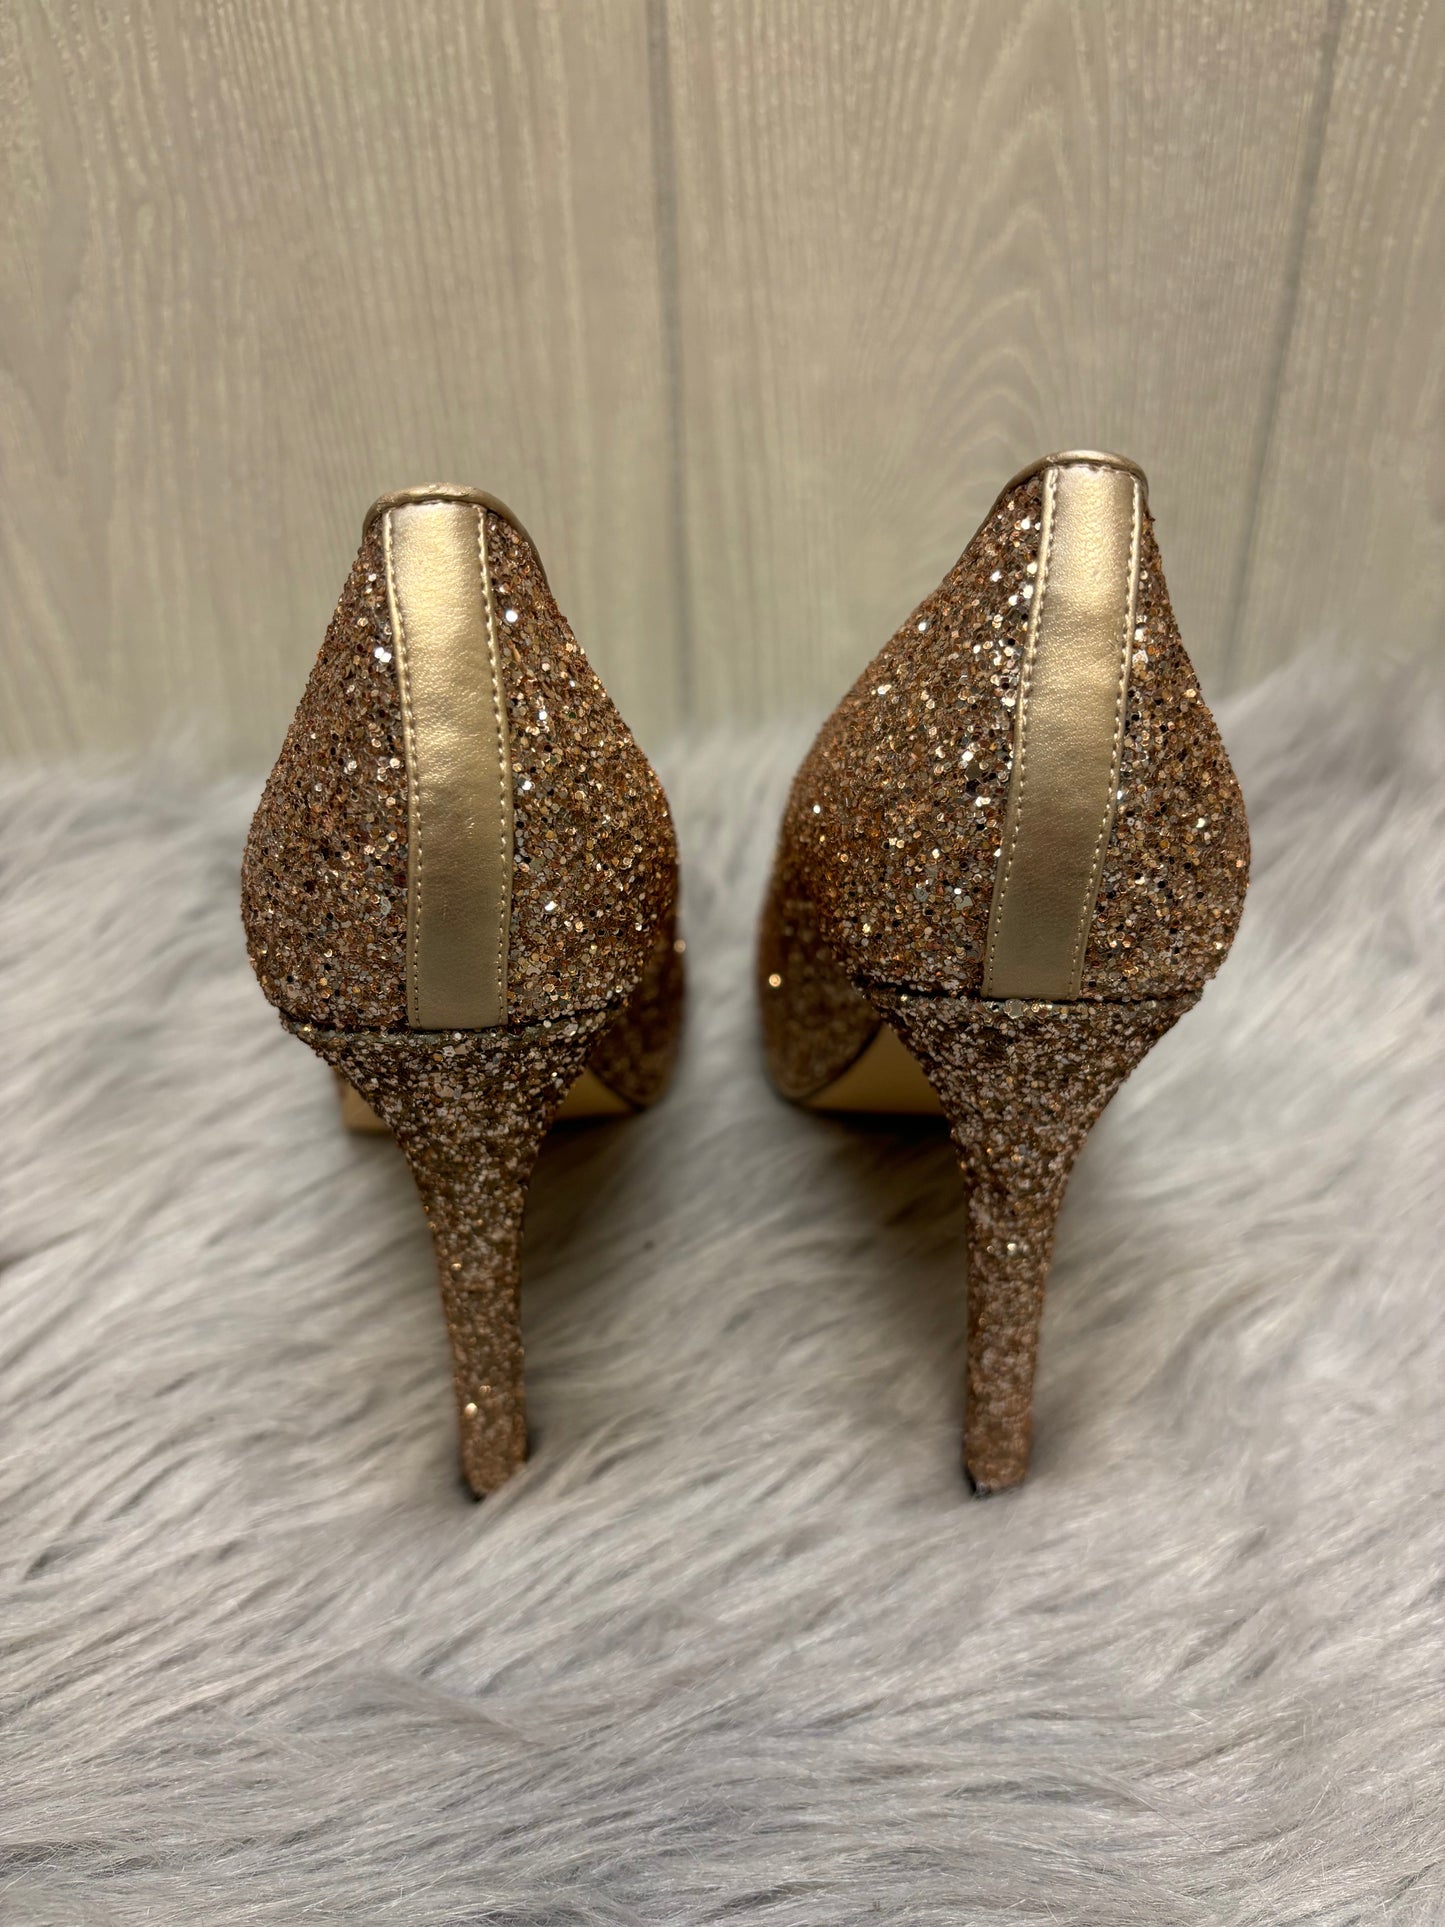 Rose Gold Shoes Heels Stiletto Guess, Size 8